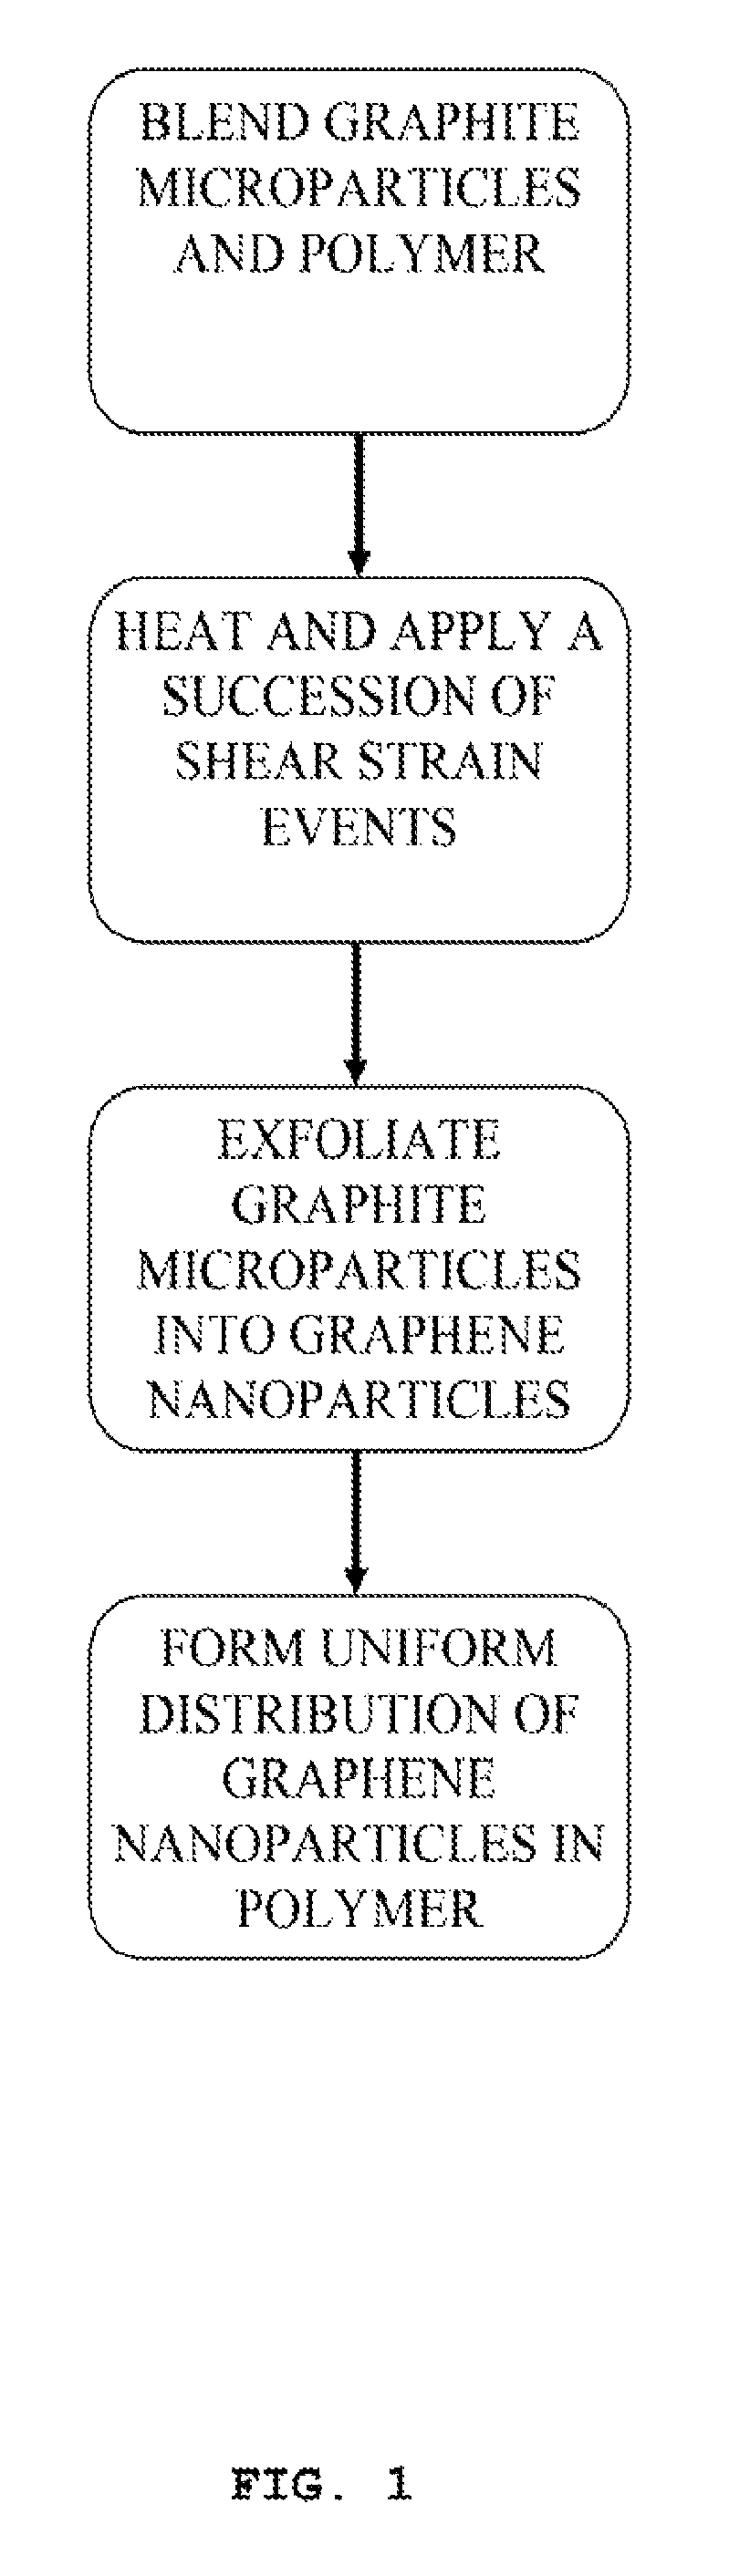 In situ exfoliation method to fabricate a graphene-reinforced polymer matrix composite (G-PMC)